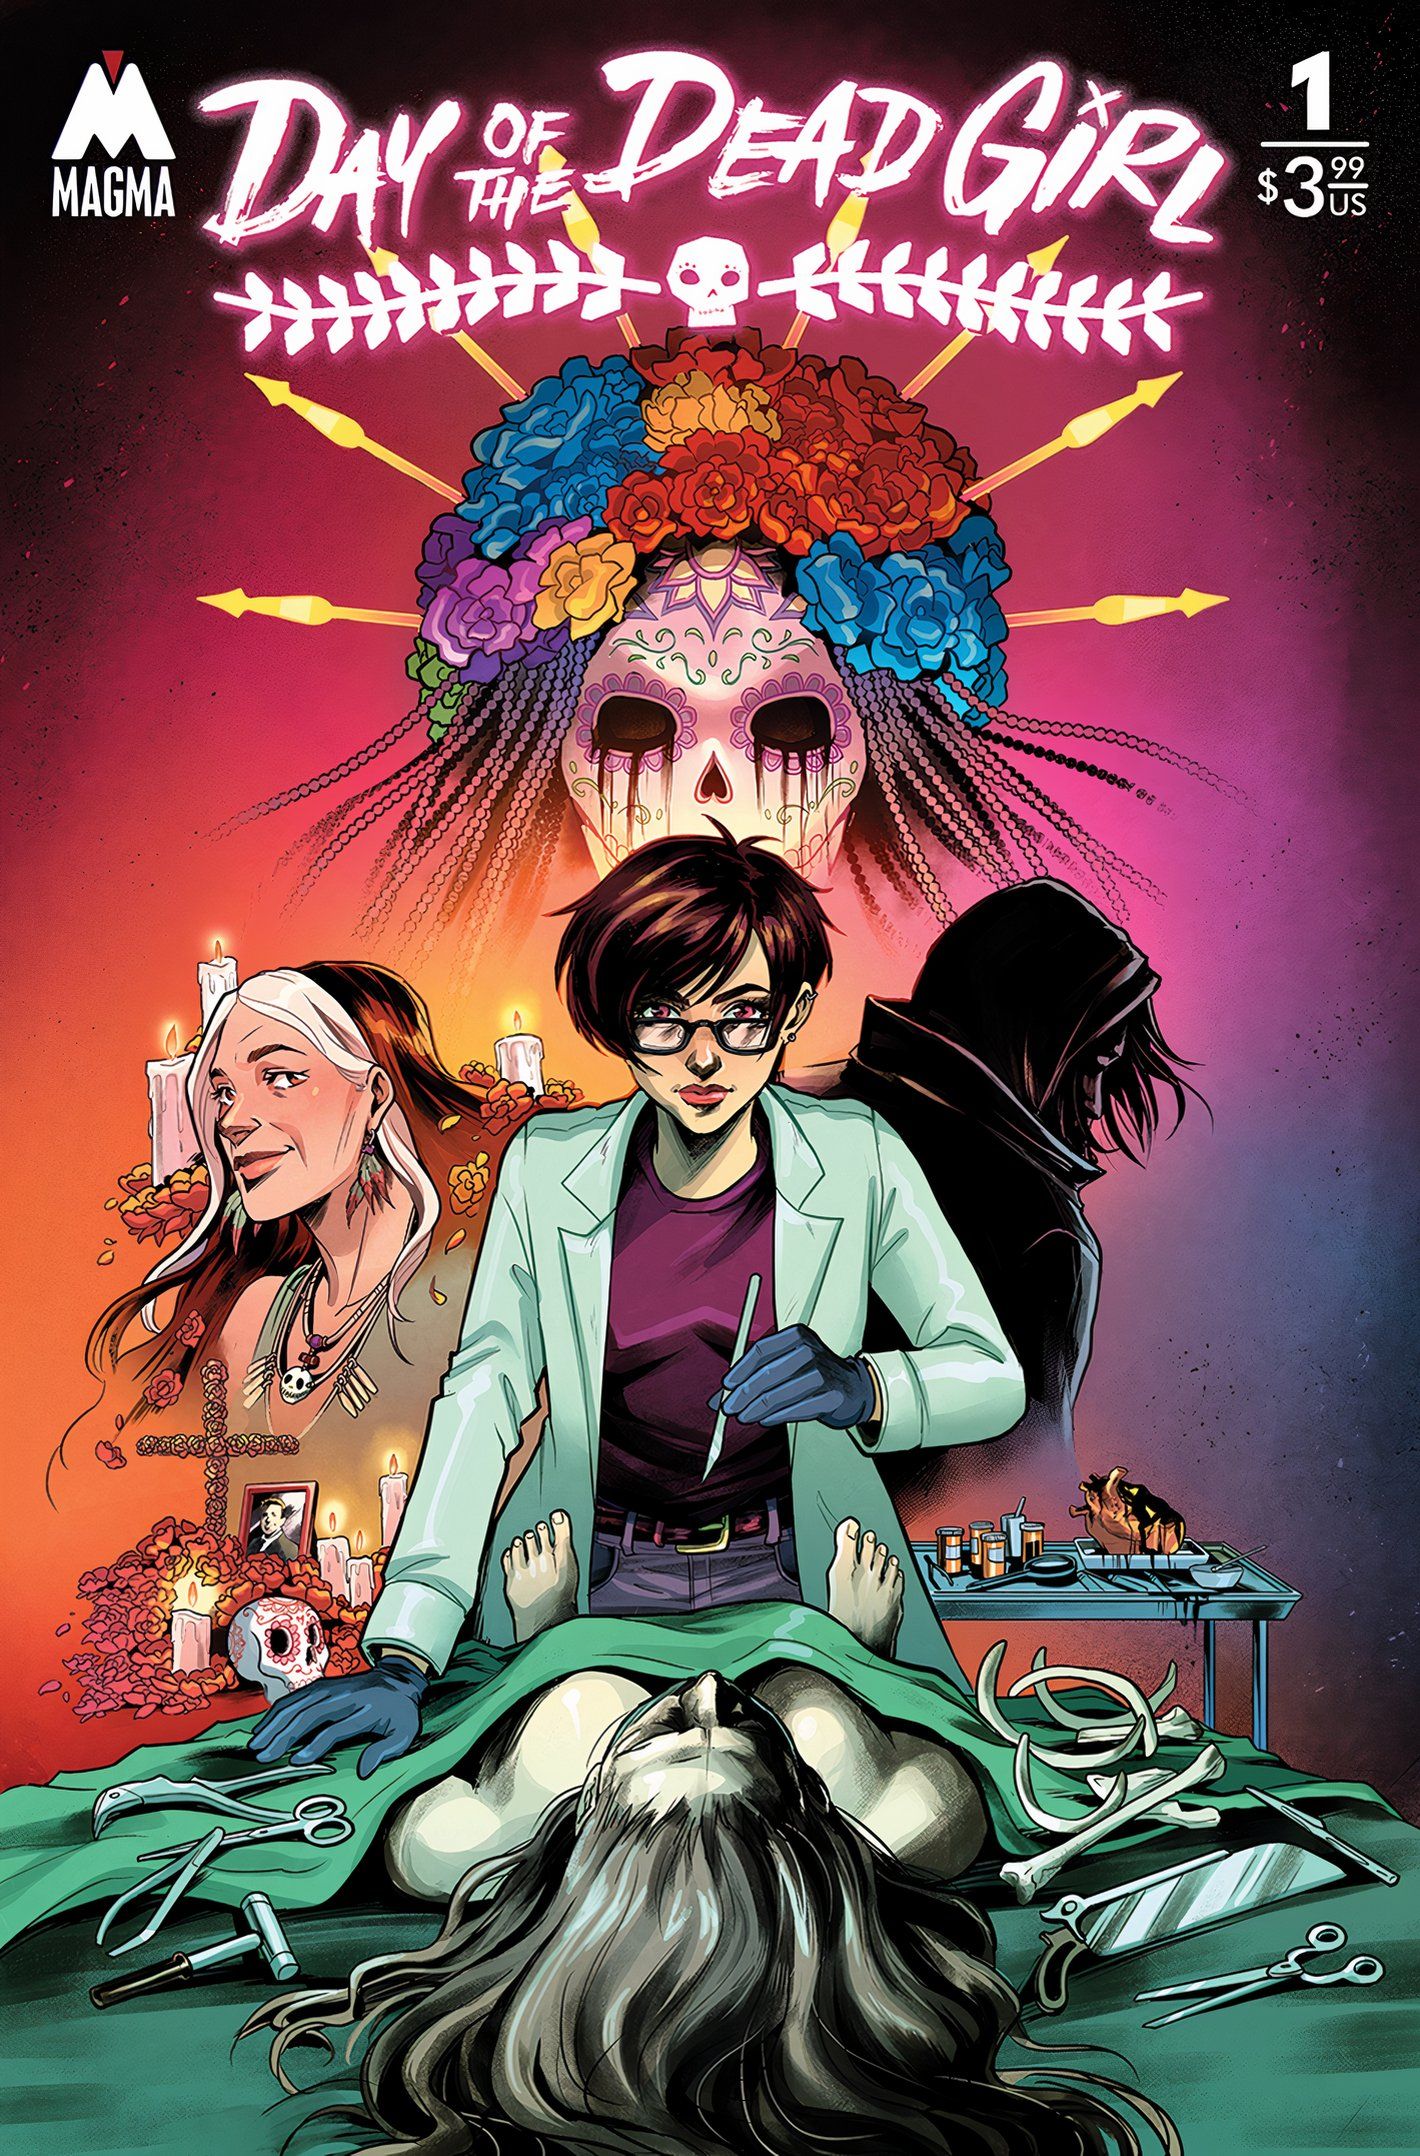 Cover for Day of the Dead Girl No. 1, with figures looming over a dead woman on a stretcher